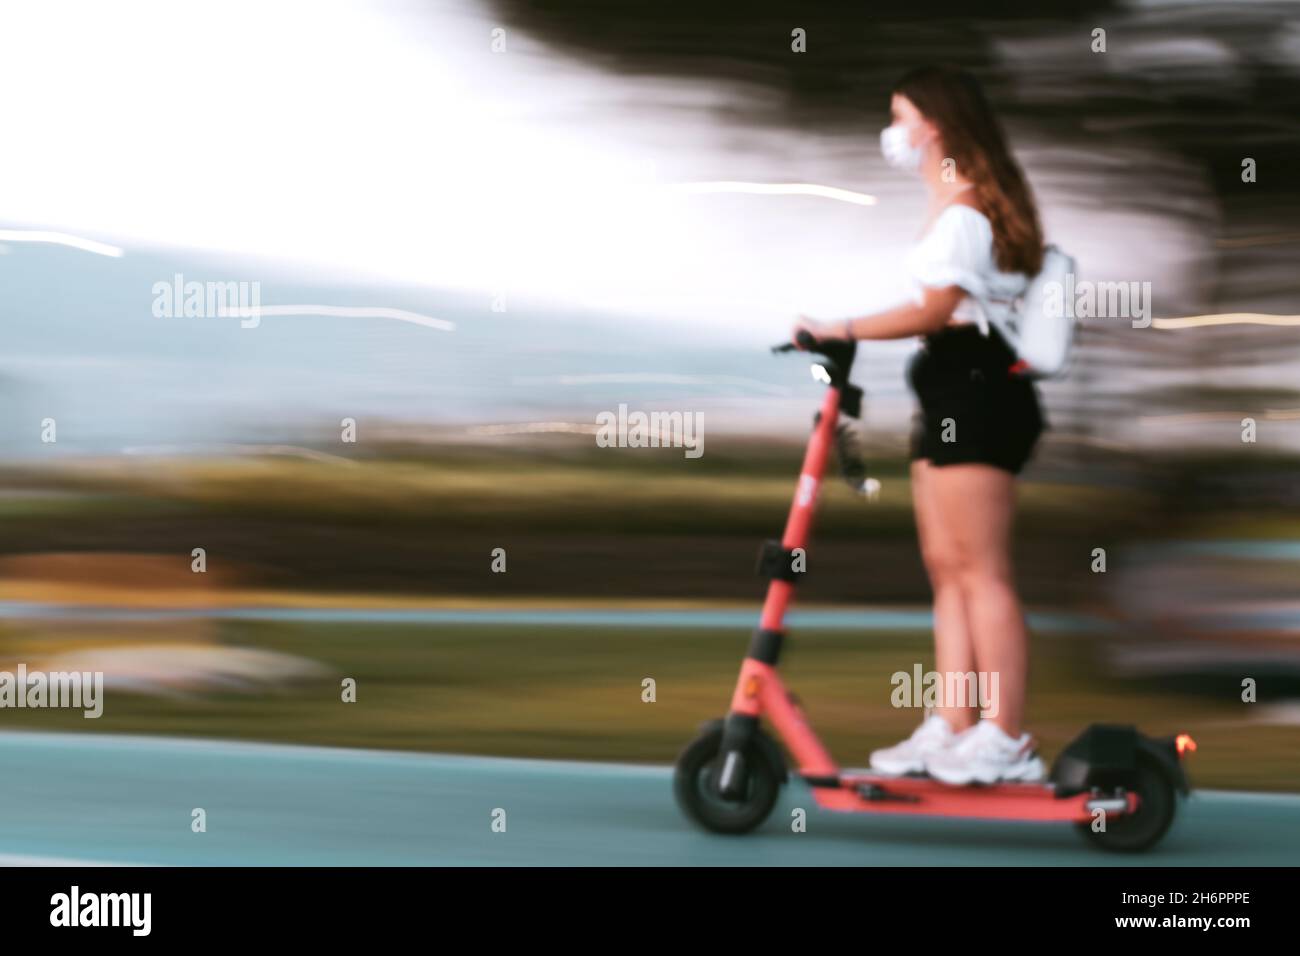 A young woman is riding a scooter. Motion blur image. Stock Photo